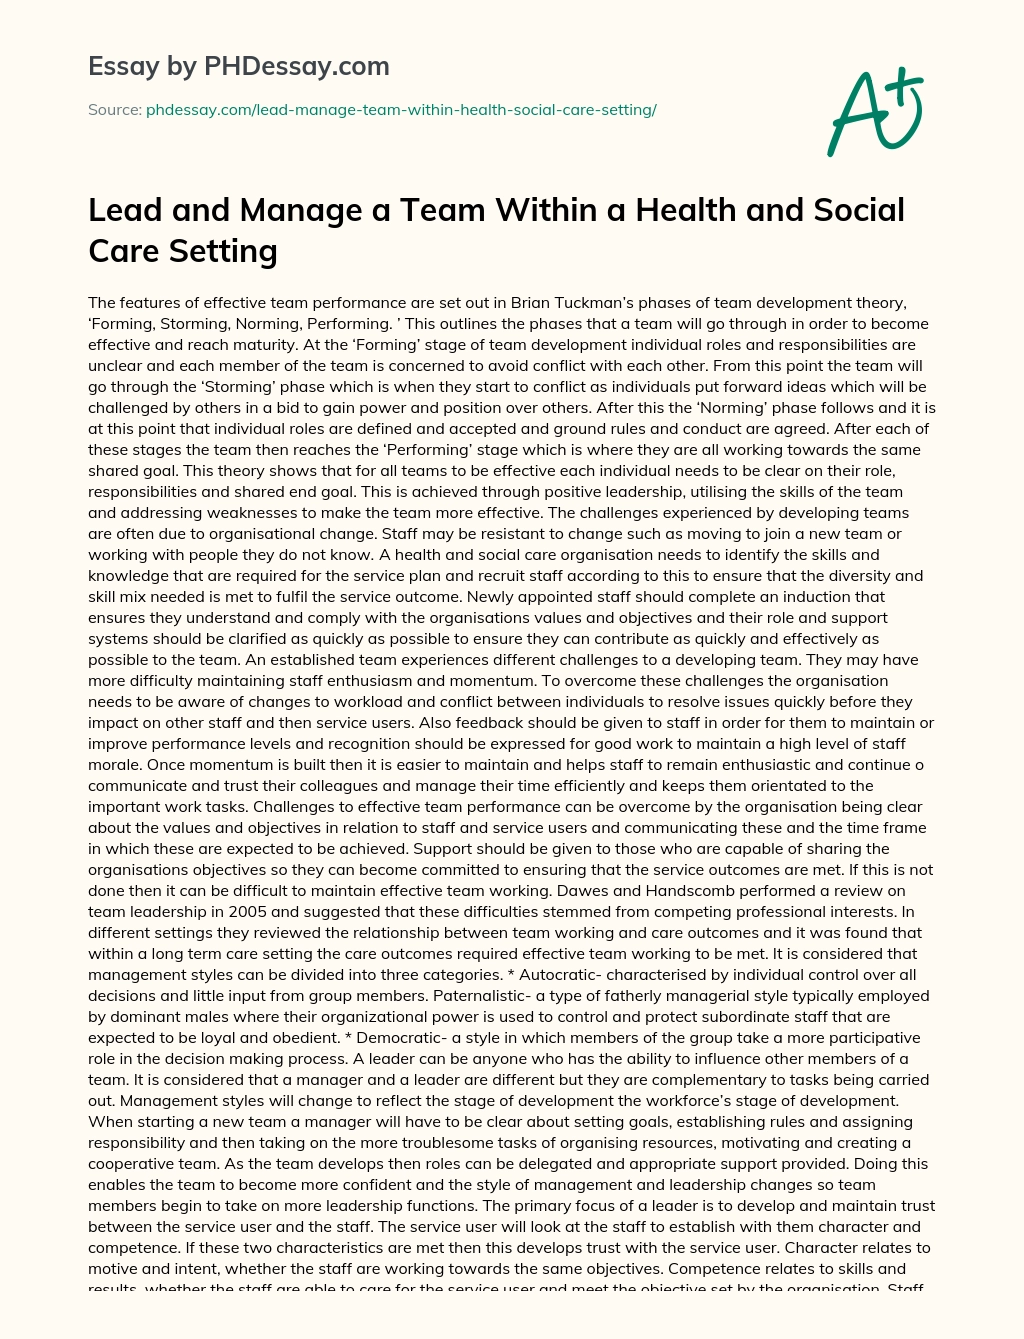 Lead and Manage a Team Within a Health and Social Care Setting essay